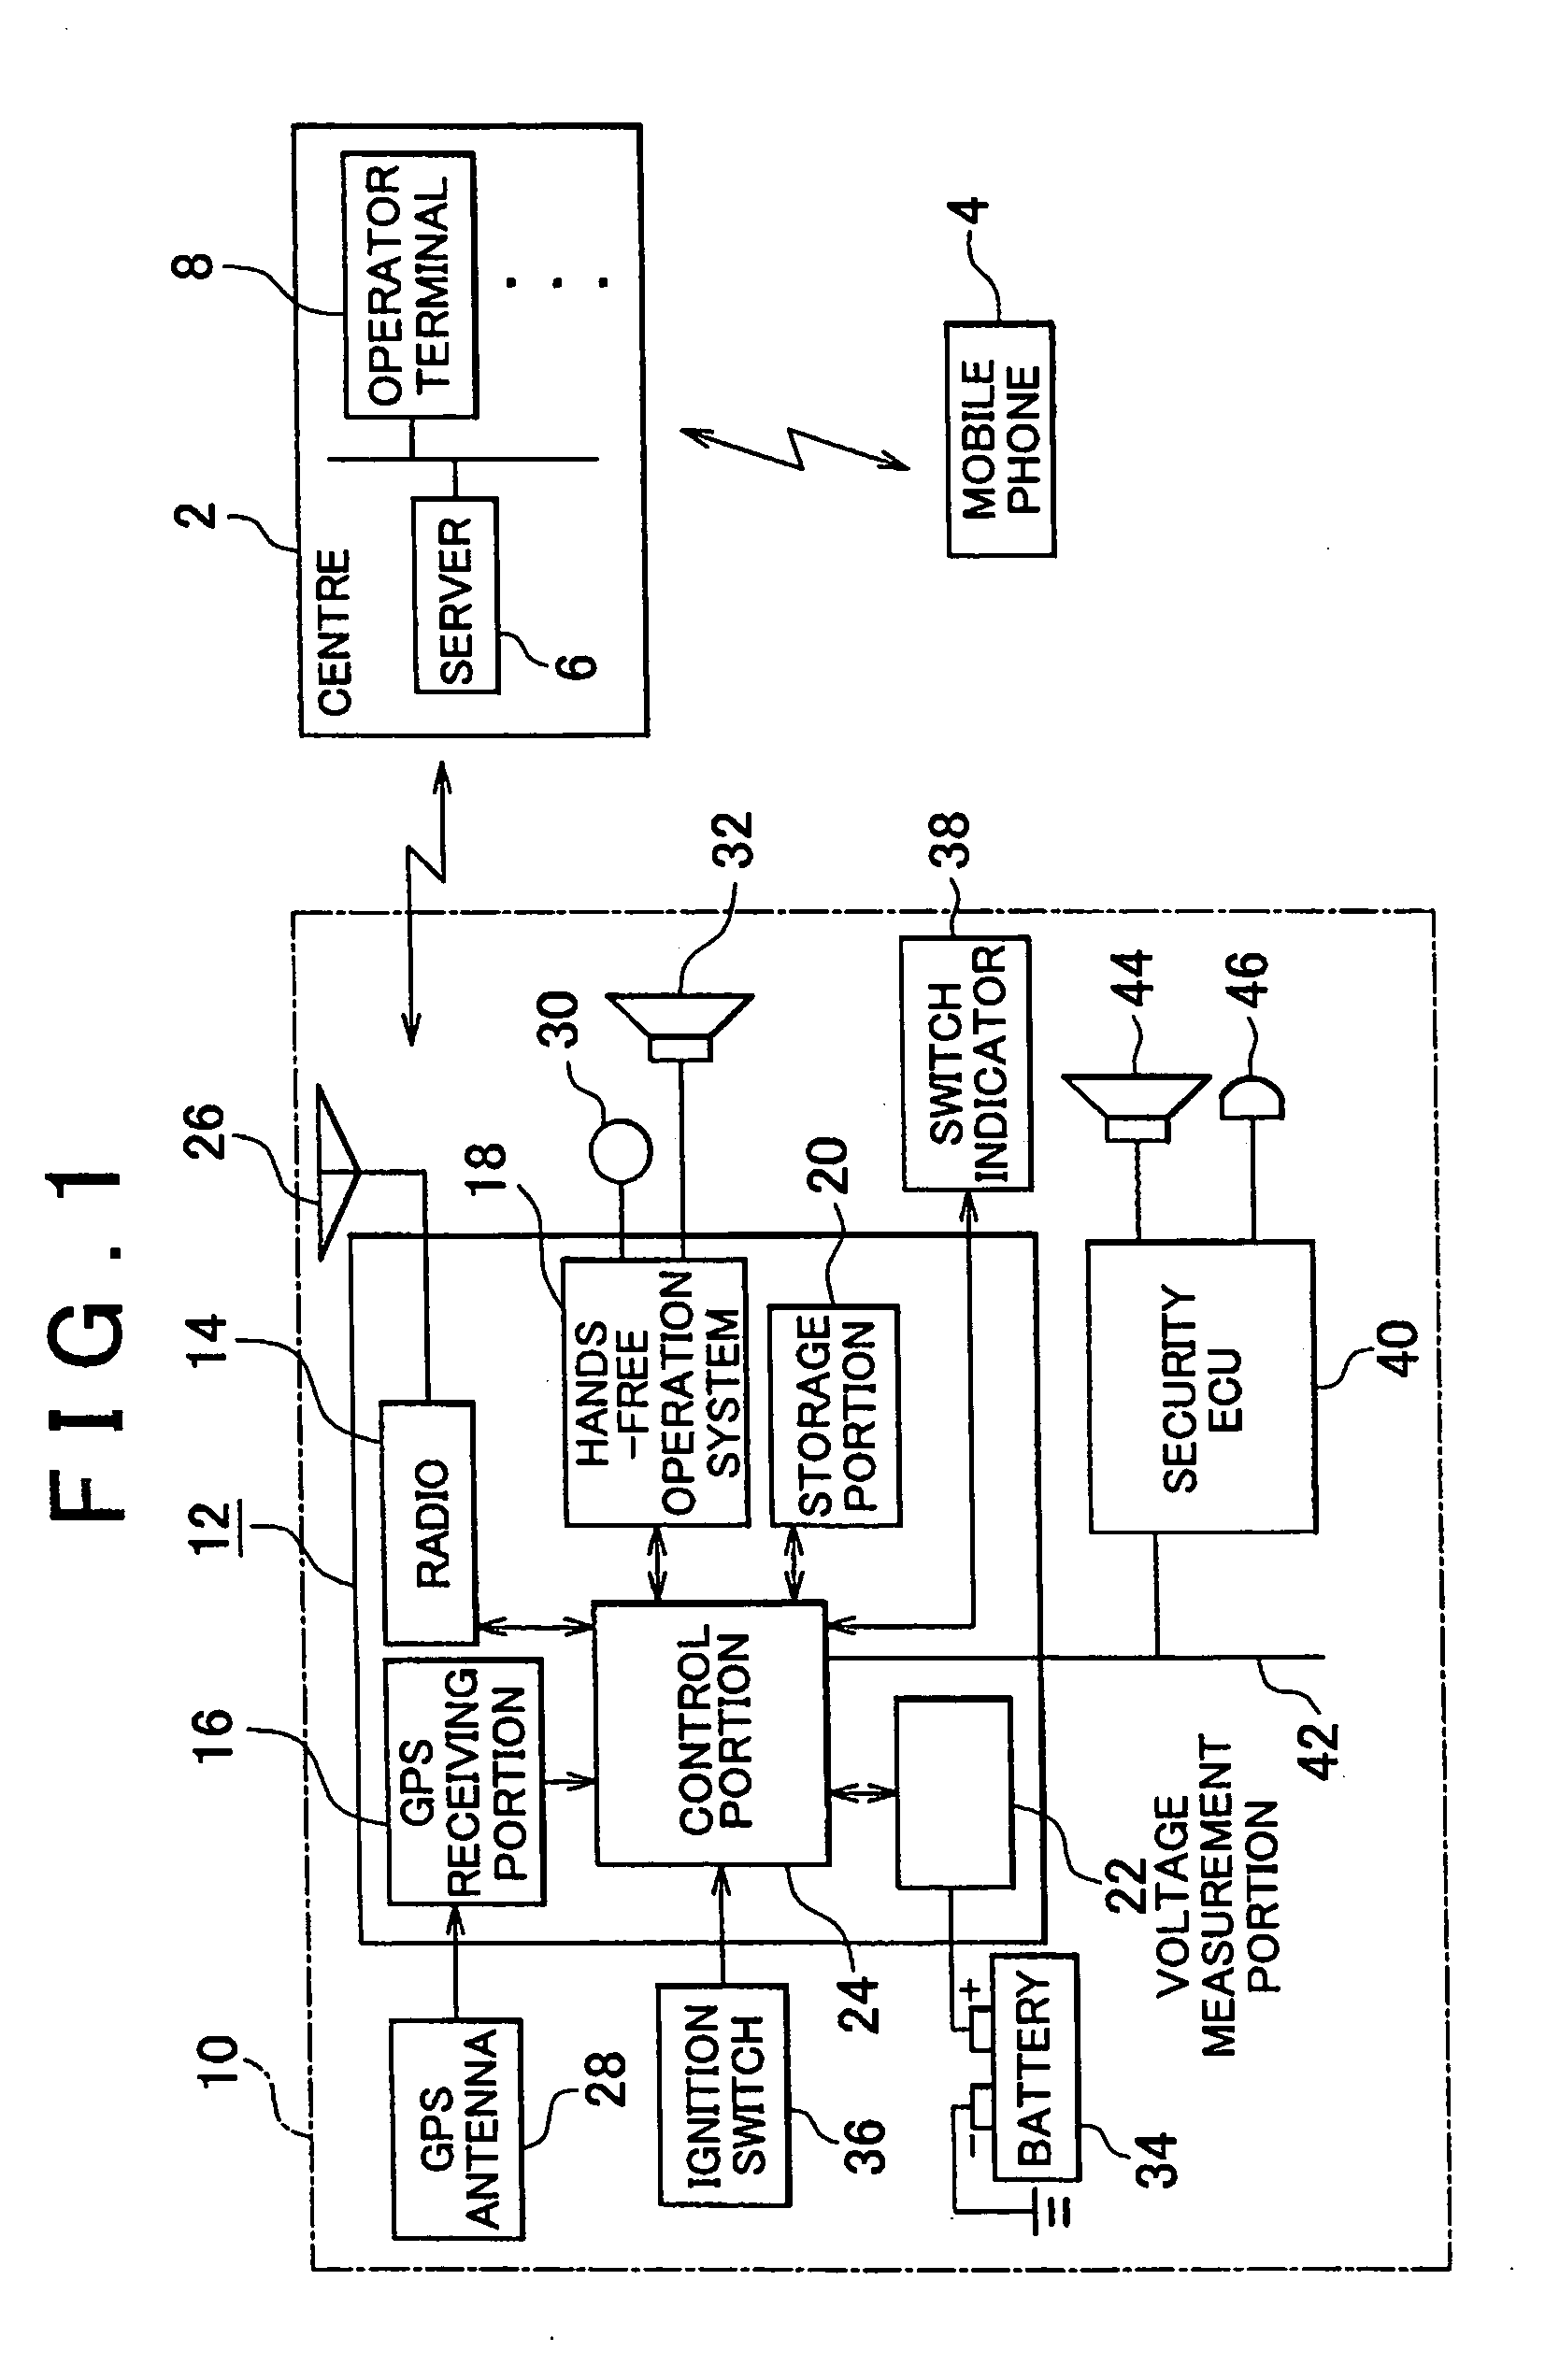 Apparatus for performance control of remote control operation service, and system and method for provision of same